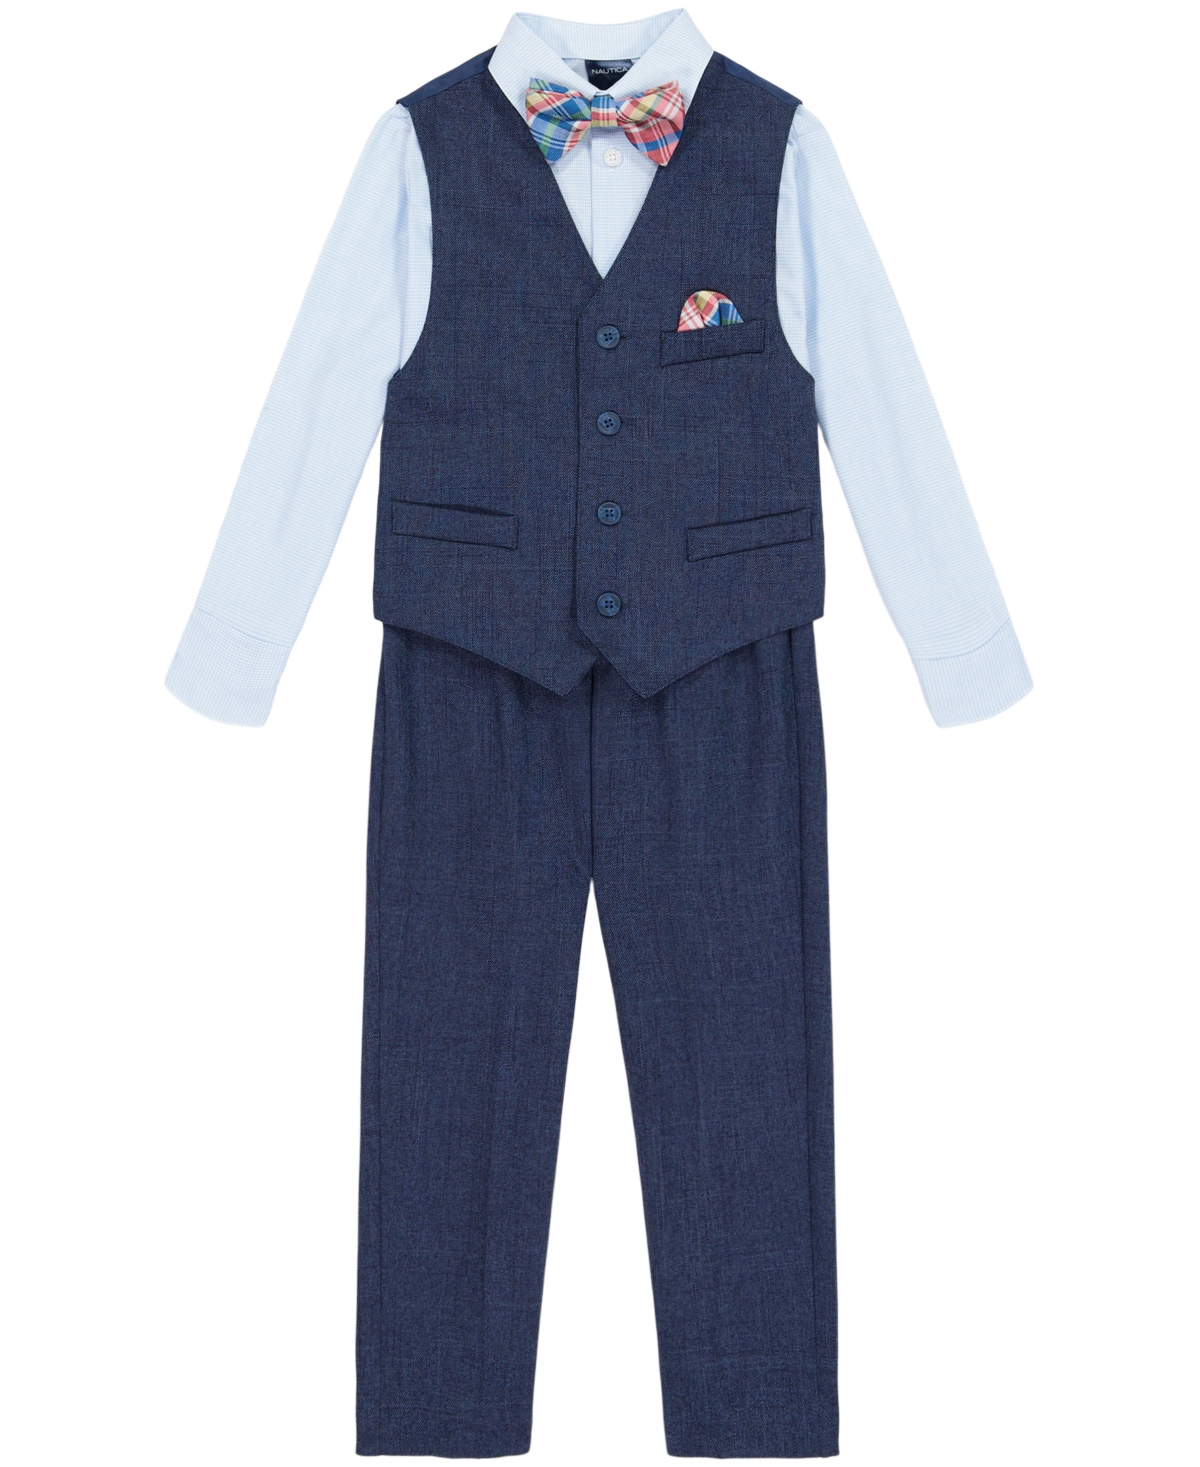 Nautica Toddler Boys Machine Washable Striated Twill Vest, Pant, Shirt, Bowtie And Pocket Square Set In Dark Blue